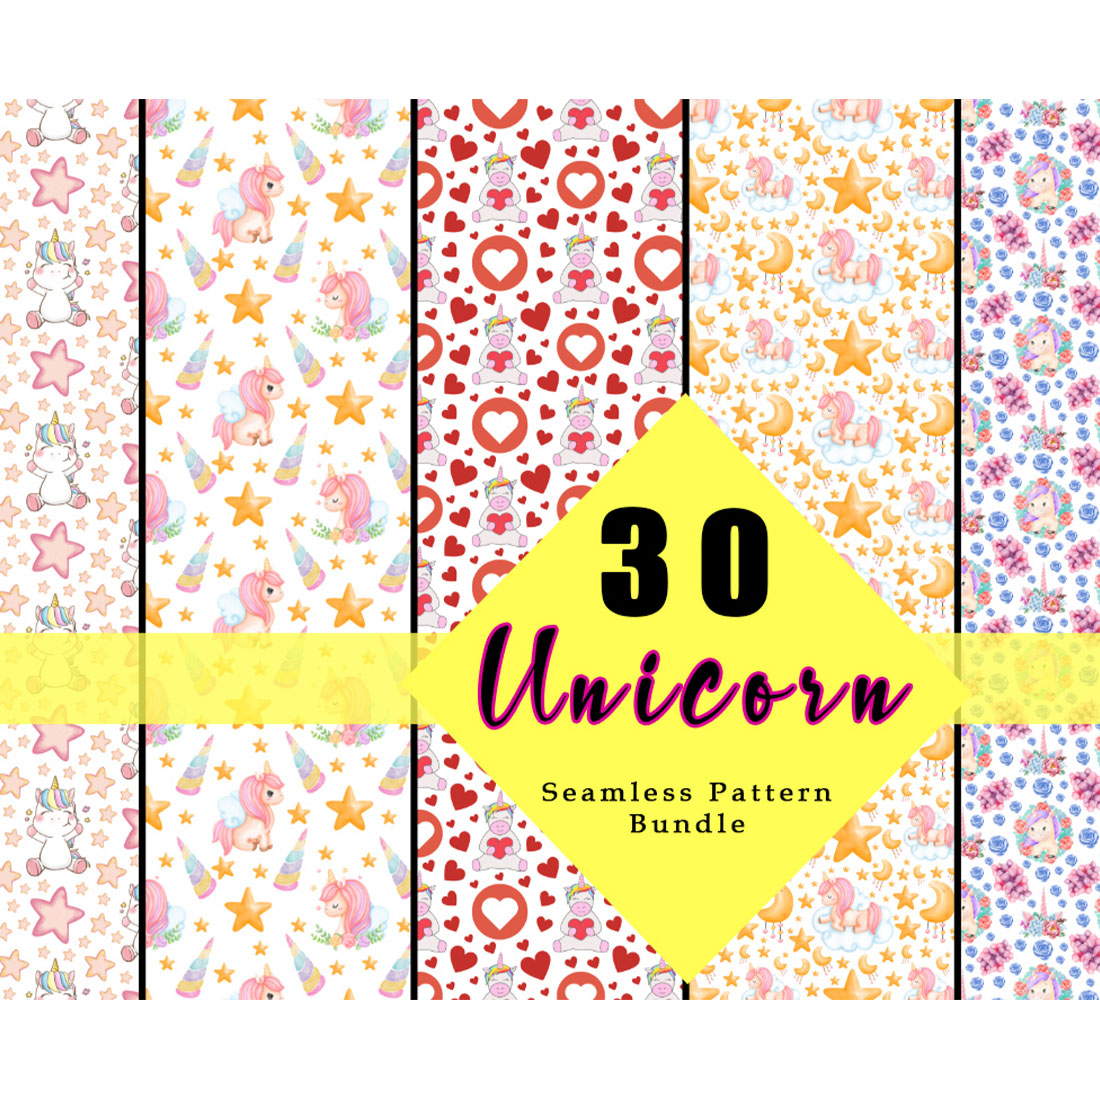 A selection of images of beautiful patterns with unicorns